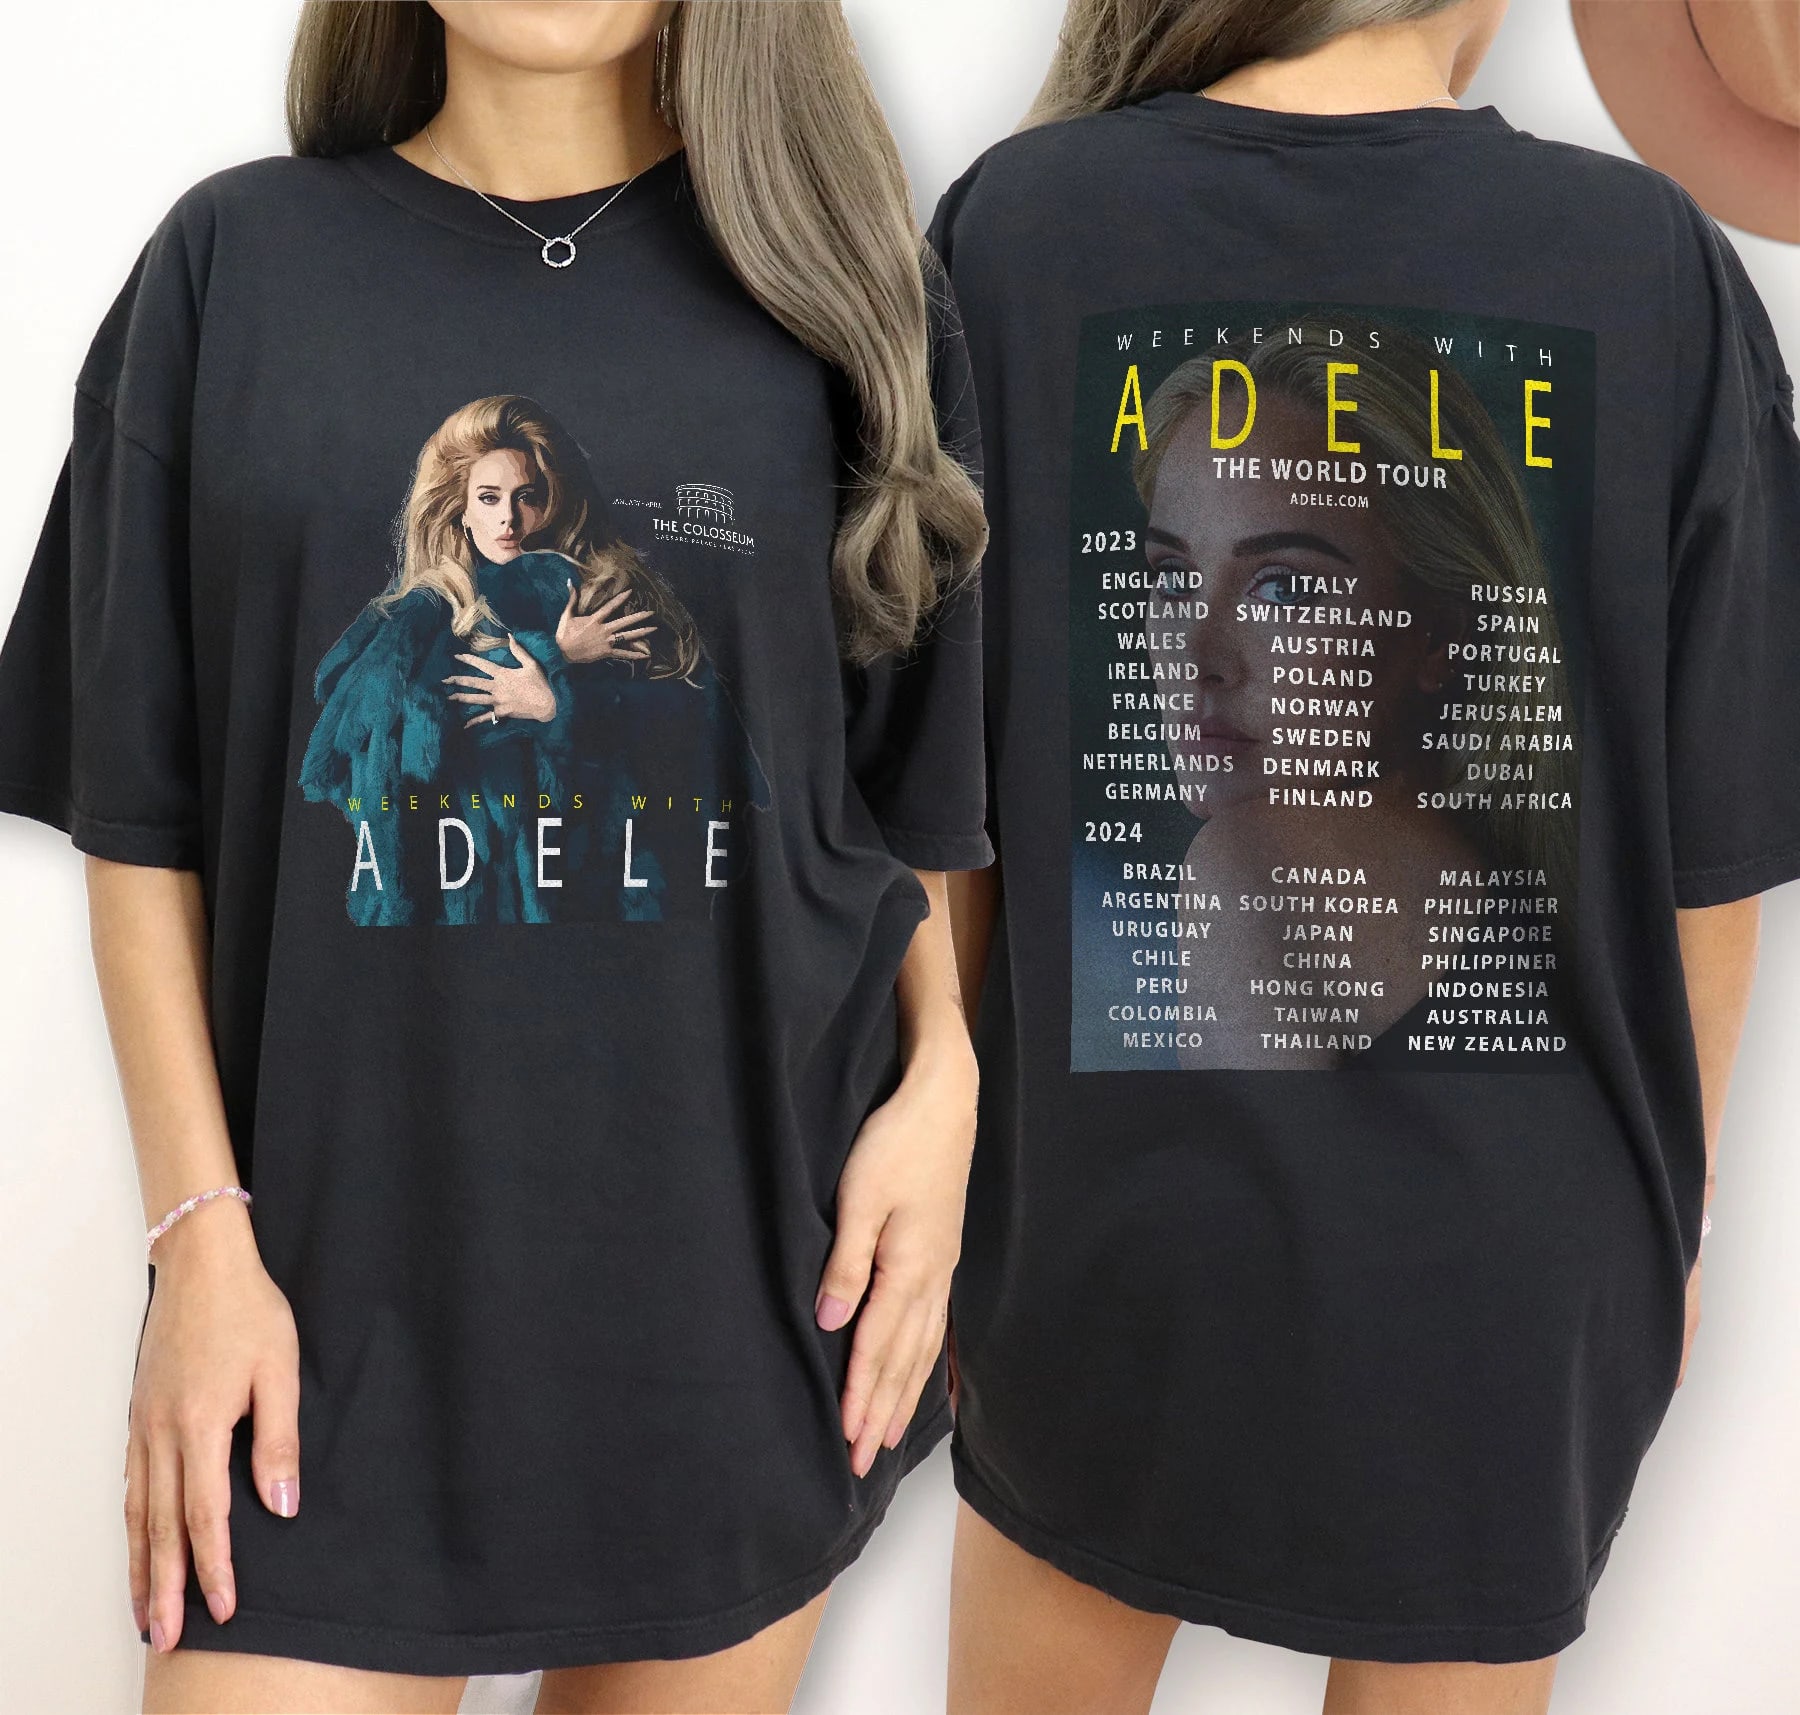 Adele Tour 2023 2024 Weekends With Adele Merch Adele Las Vegas T Shirt E26vdt